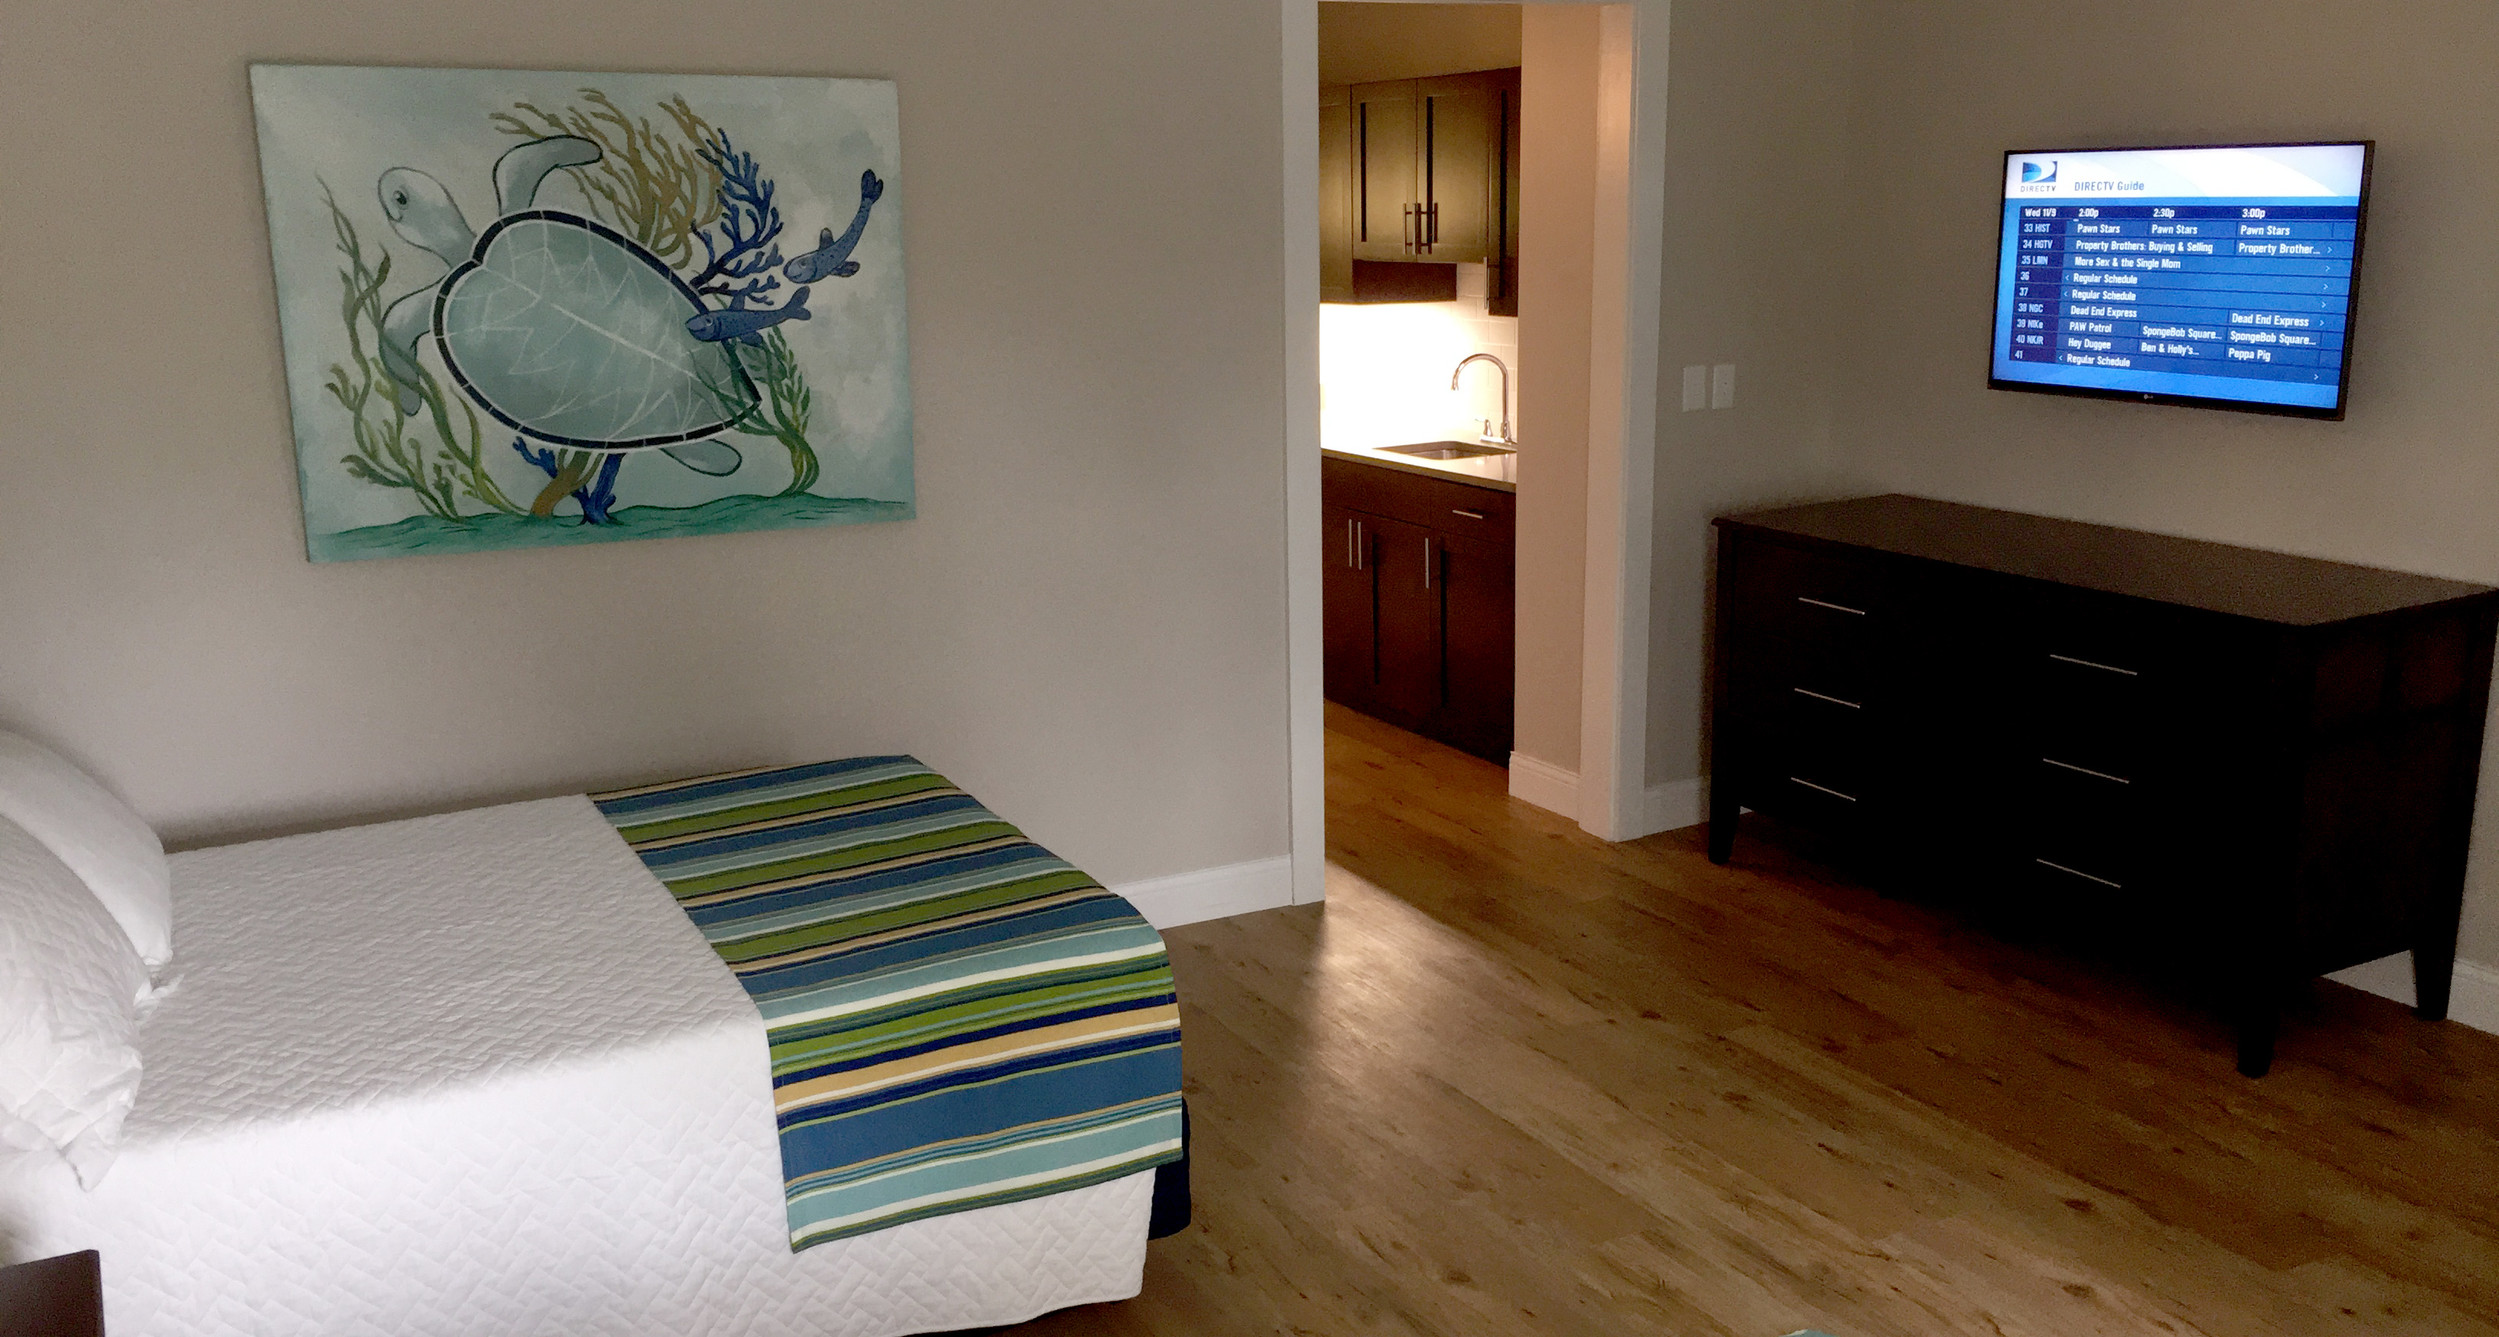 A renovated guest room at Ronald McDonald House in Jacksonville features televisions and DirecTV services donated by MDM.